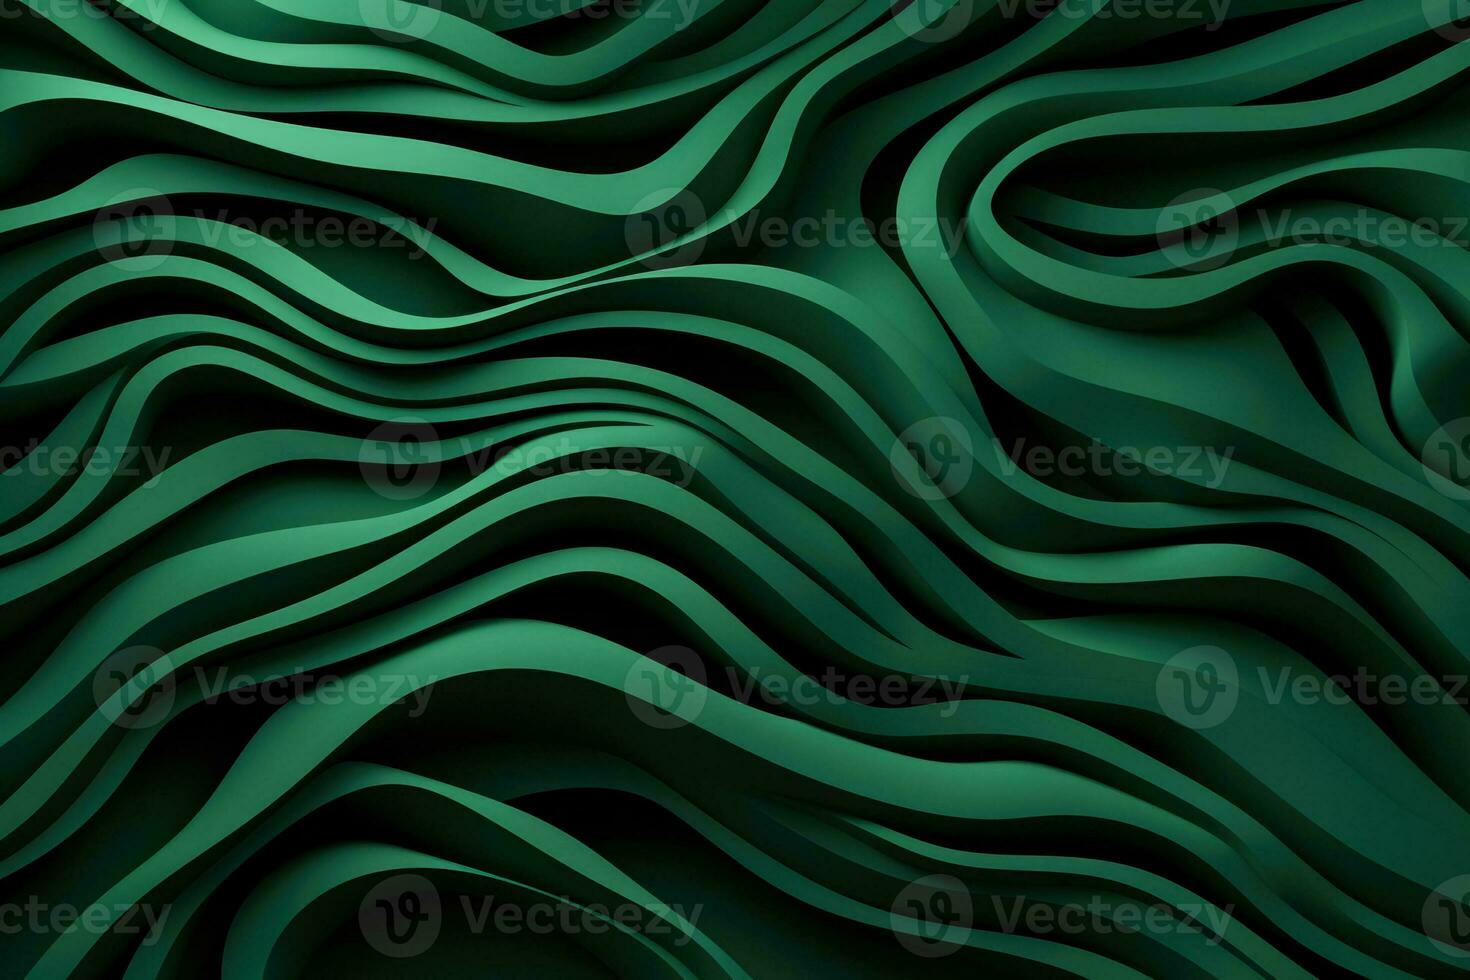 Organic green lines in abstract pattern for wallpaper background photo